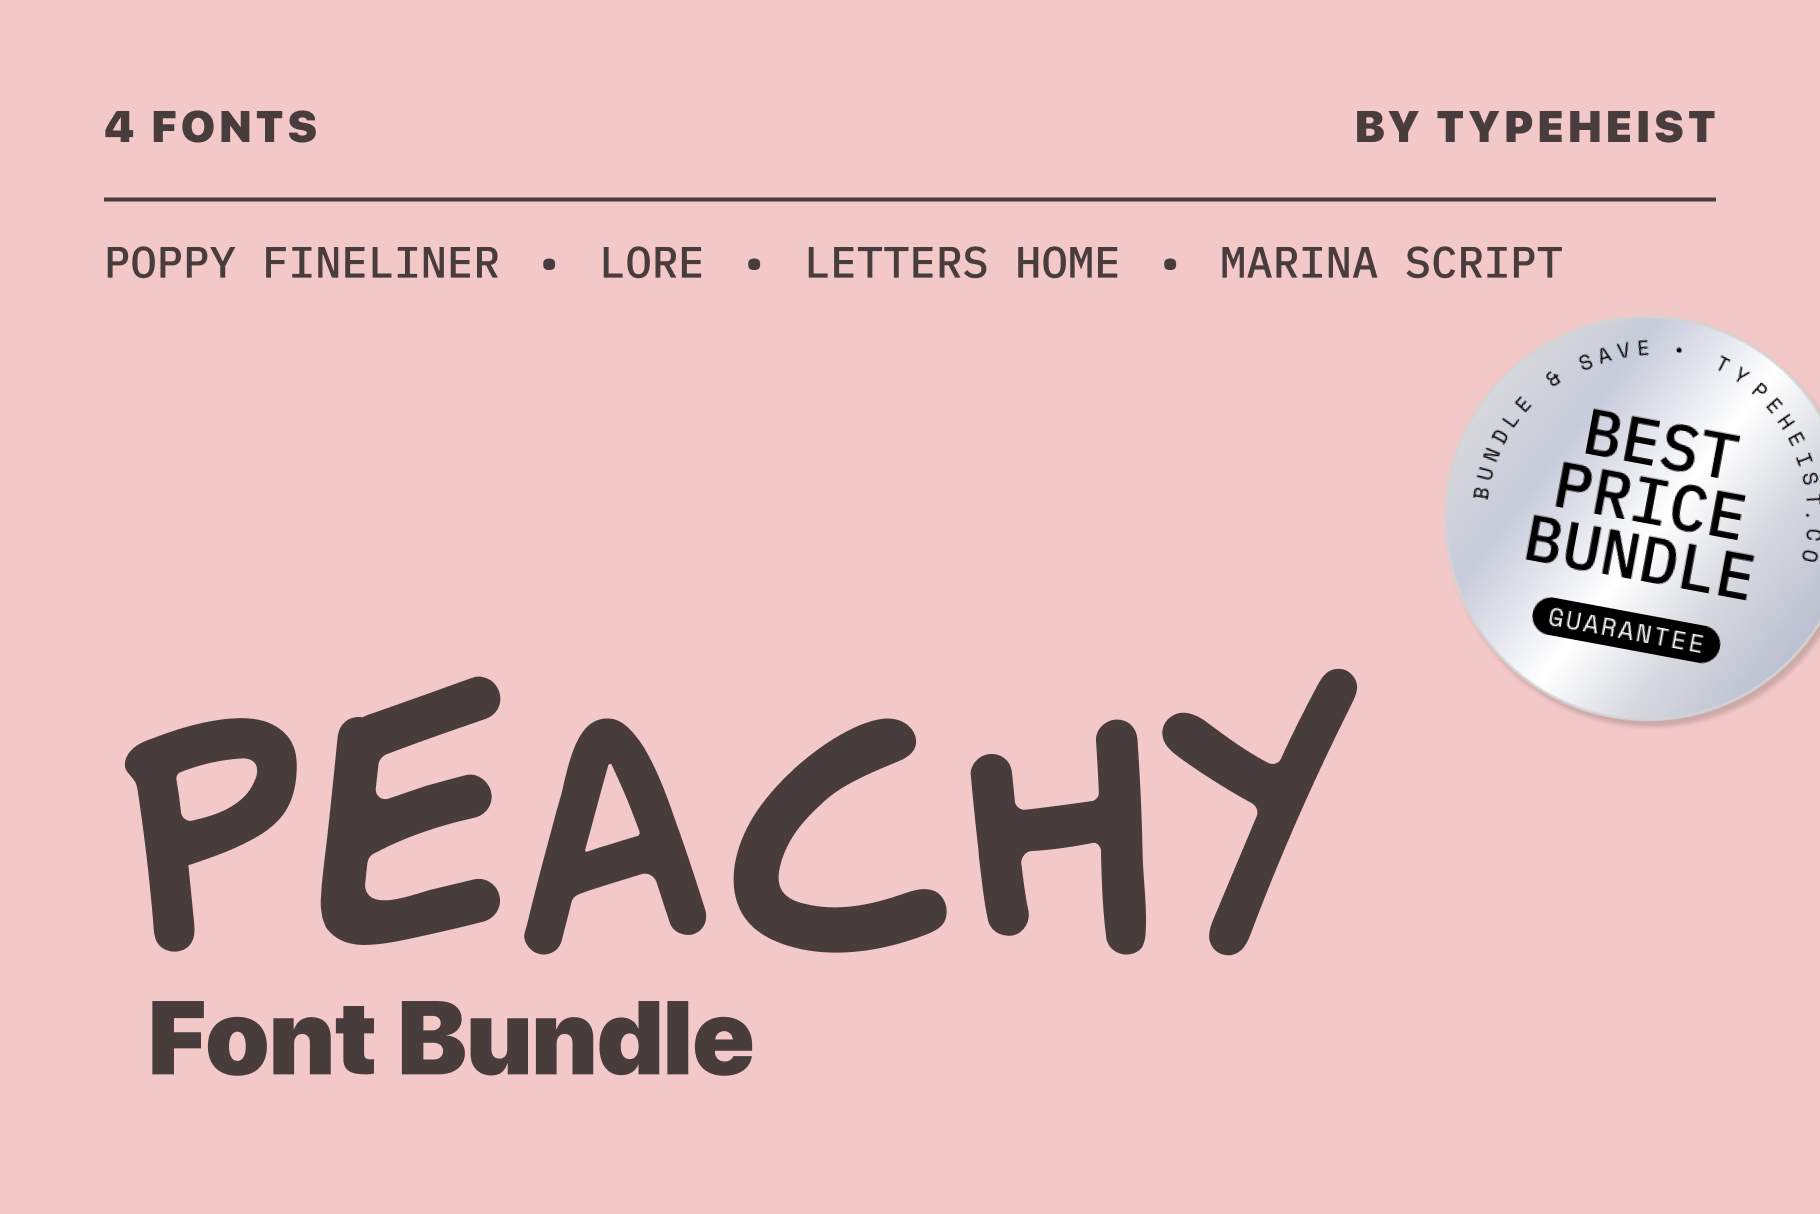 Peachy Font Bundle: 4 cute and casual handwriting fonts, in a bundle!